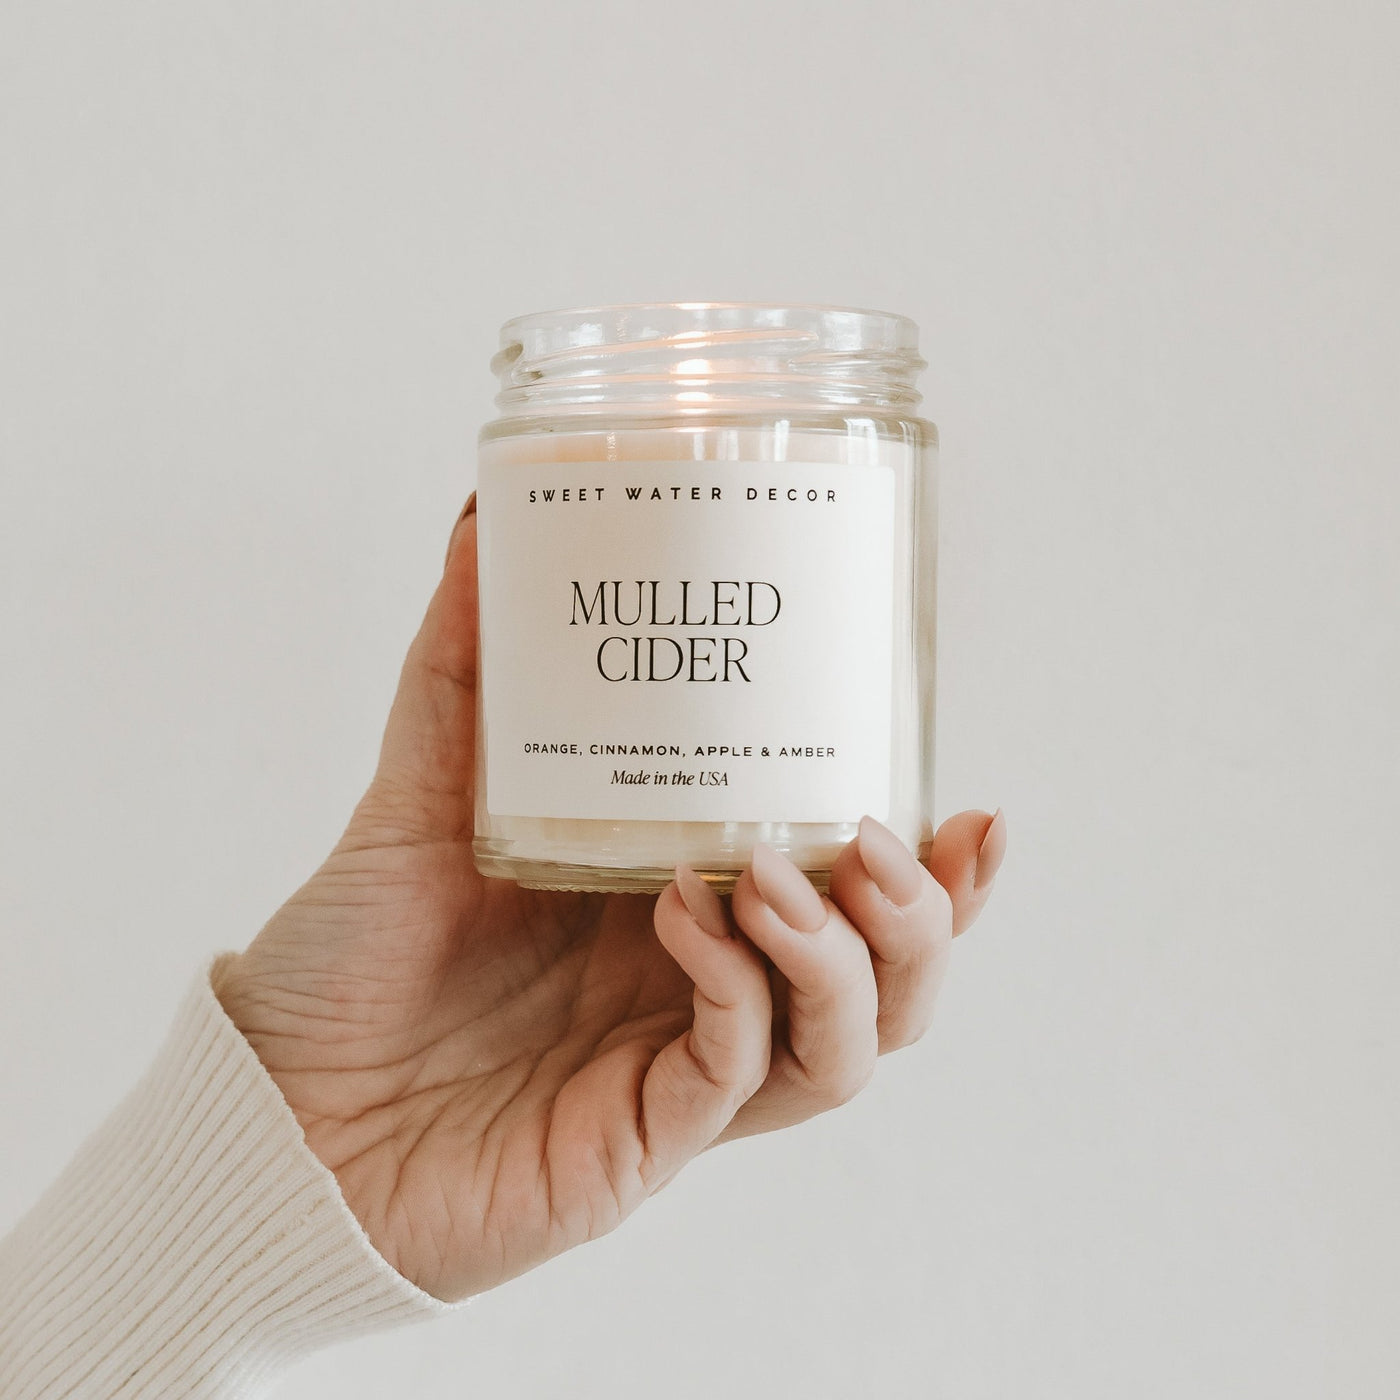 Mulled Cider Soy Candle - Clear Jar - 9 oz - Sweet Water Decor - Candles